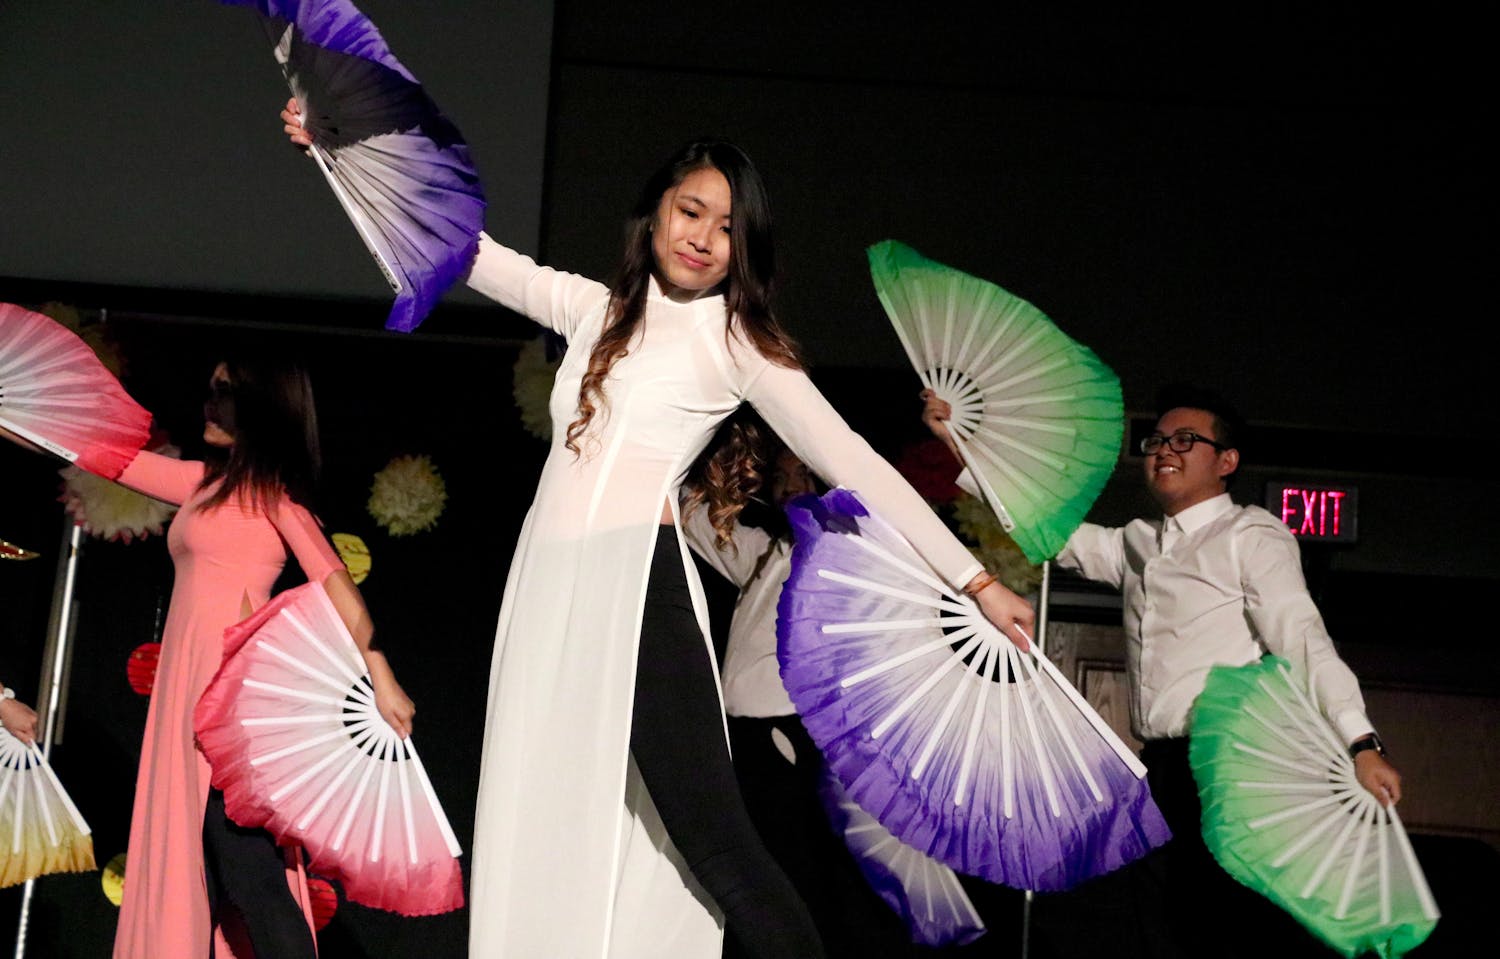 The Vietnamese Student Organization’s traditional dance group waved their fans for their performance on Saturday night for the organization's “Tết” celebration, or the Vietnamese New Year. They also performed with umbrellas and bamboo hats as part of the holiday tradition.